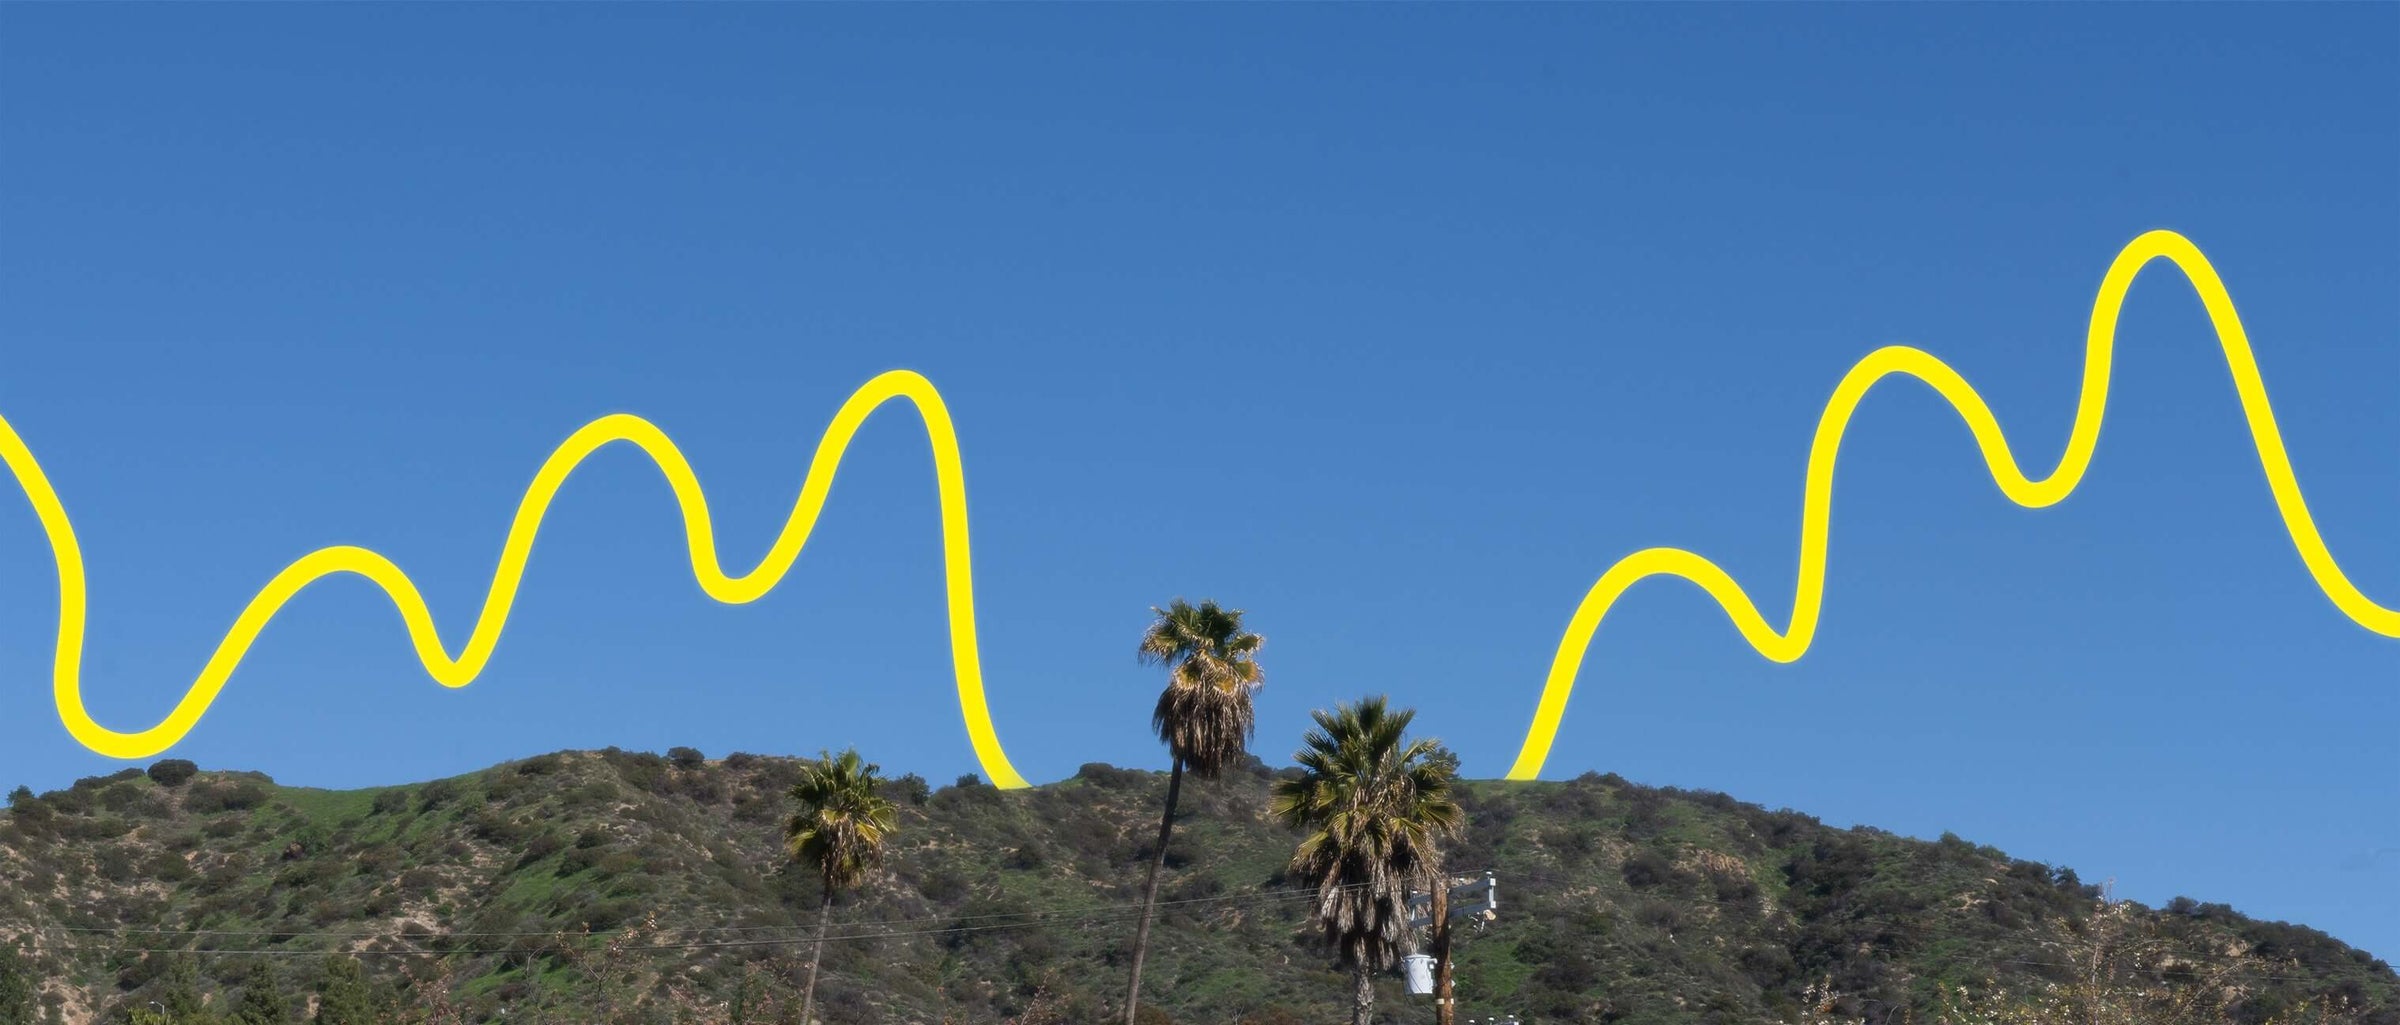 A banner of a hill with palm trees in Los Angeles, with vibrant yellow line art on it.